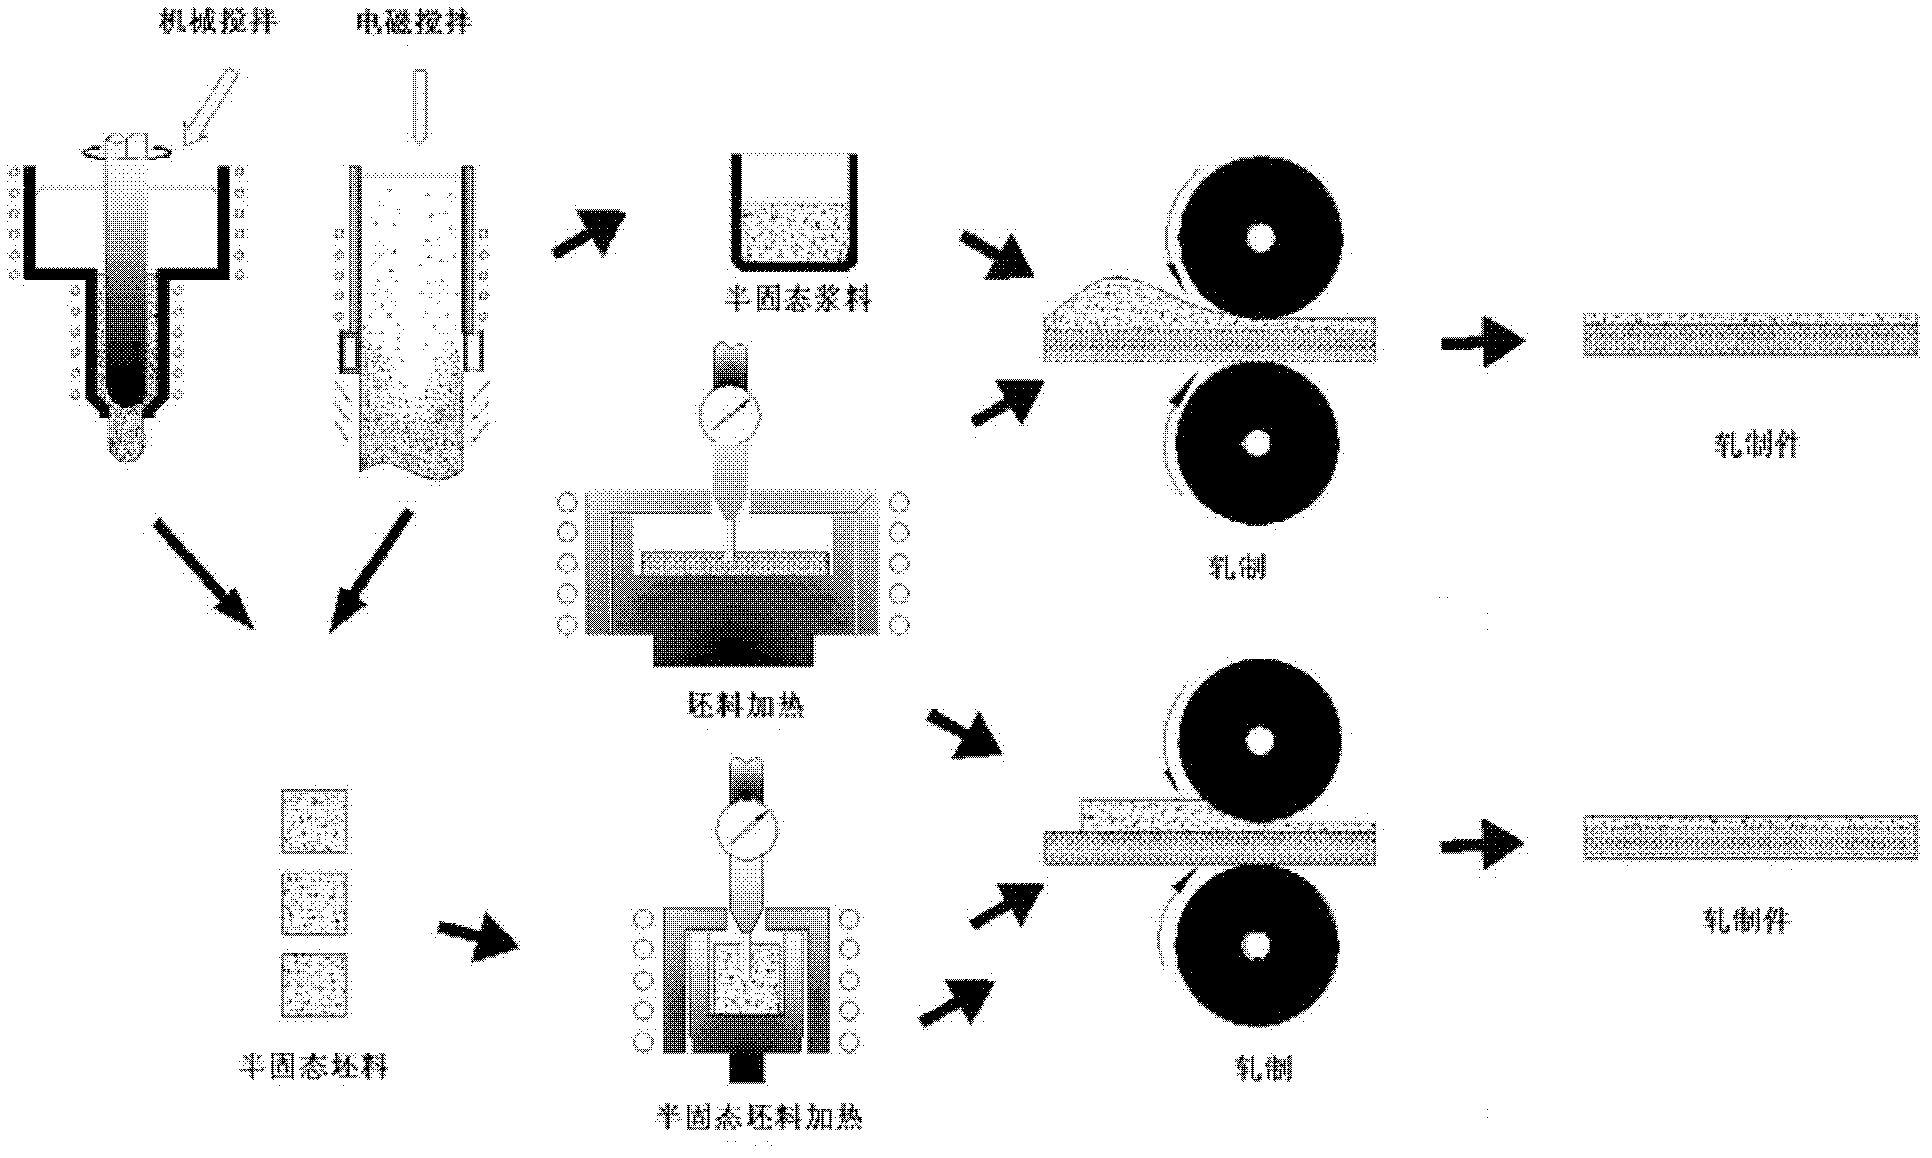 Method for connecting semi-solid materials into whole